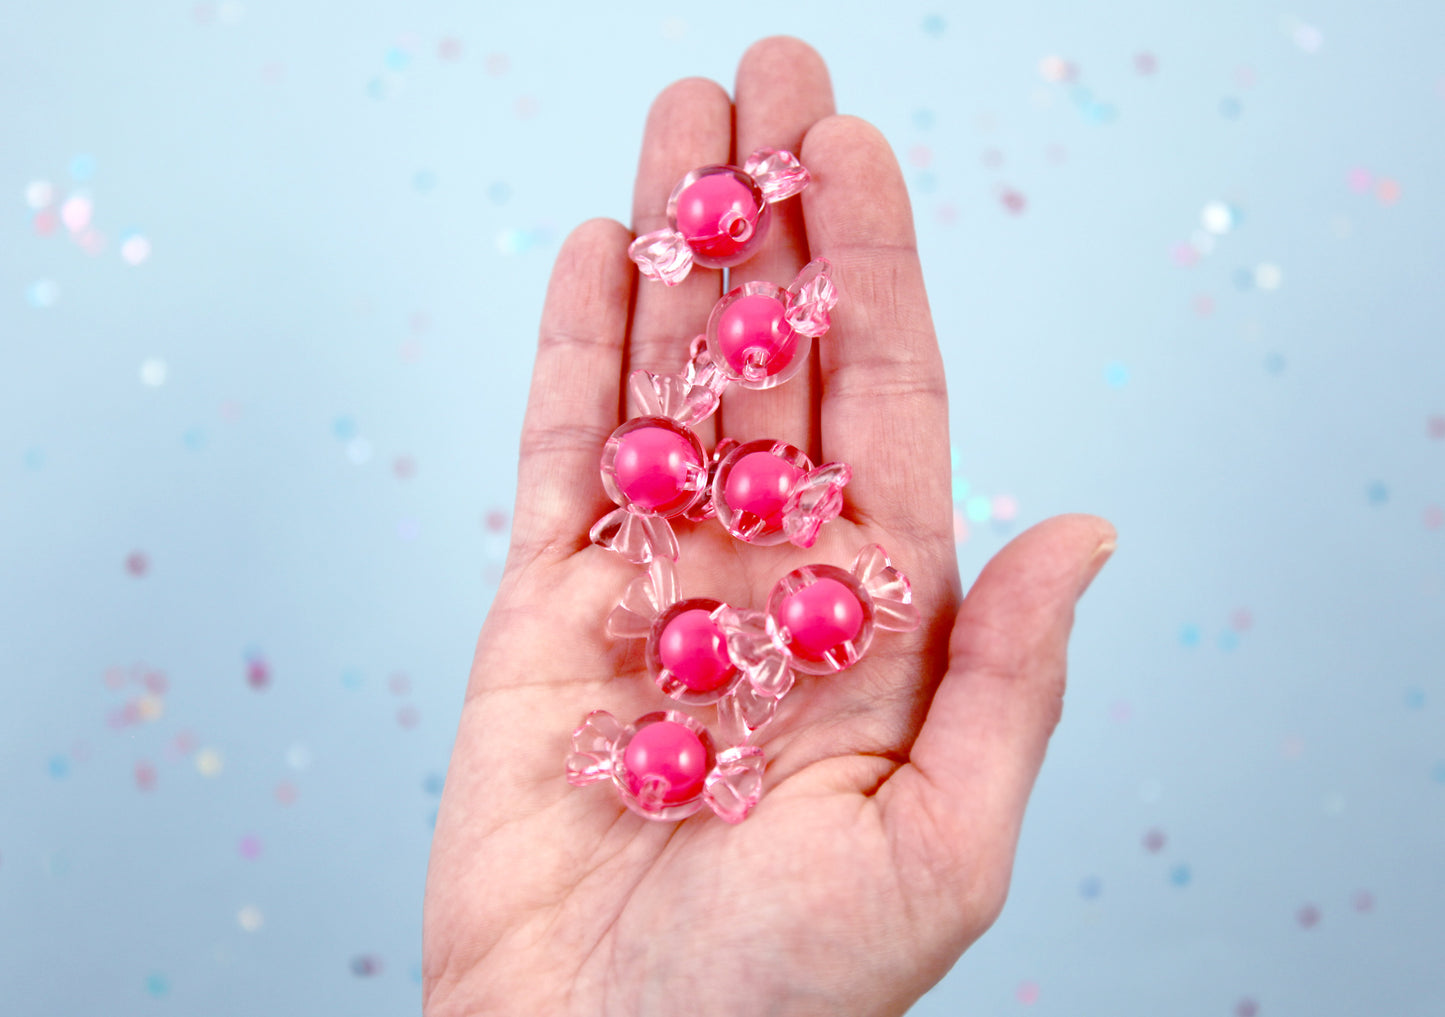 Candy Beads - Bright Pink - 30mm Big Pastel Candies Wrapped Candy Shape Acrylic or Resin Beads - 20 pc set